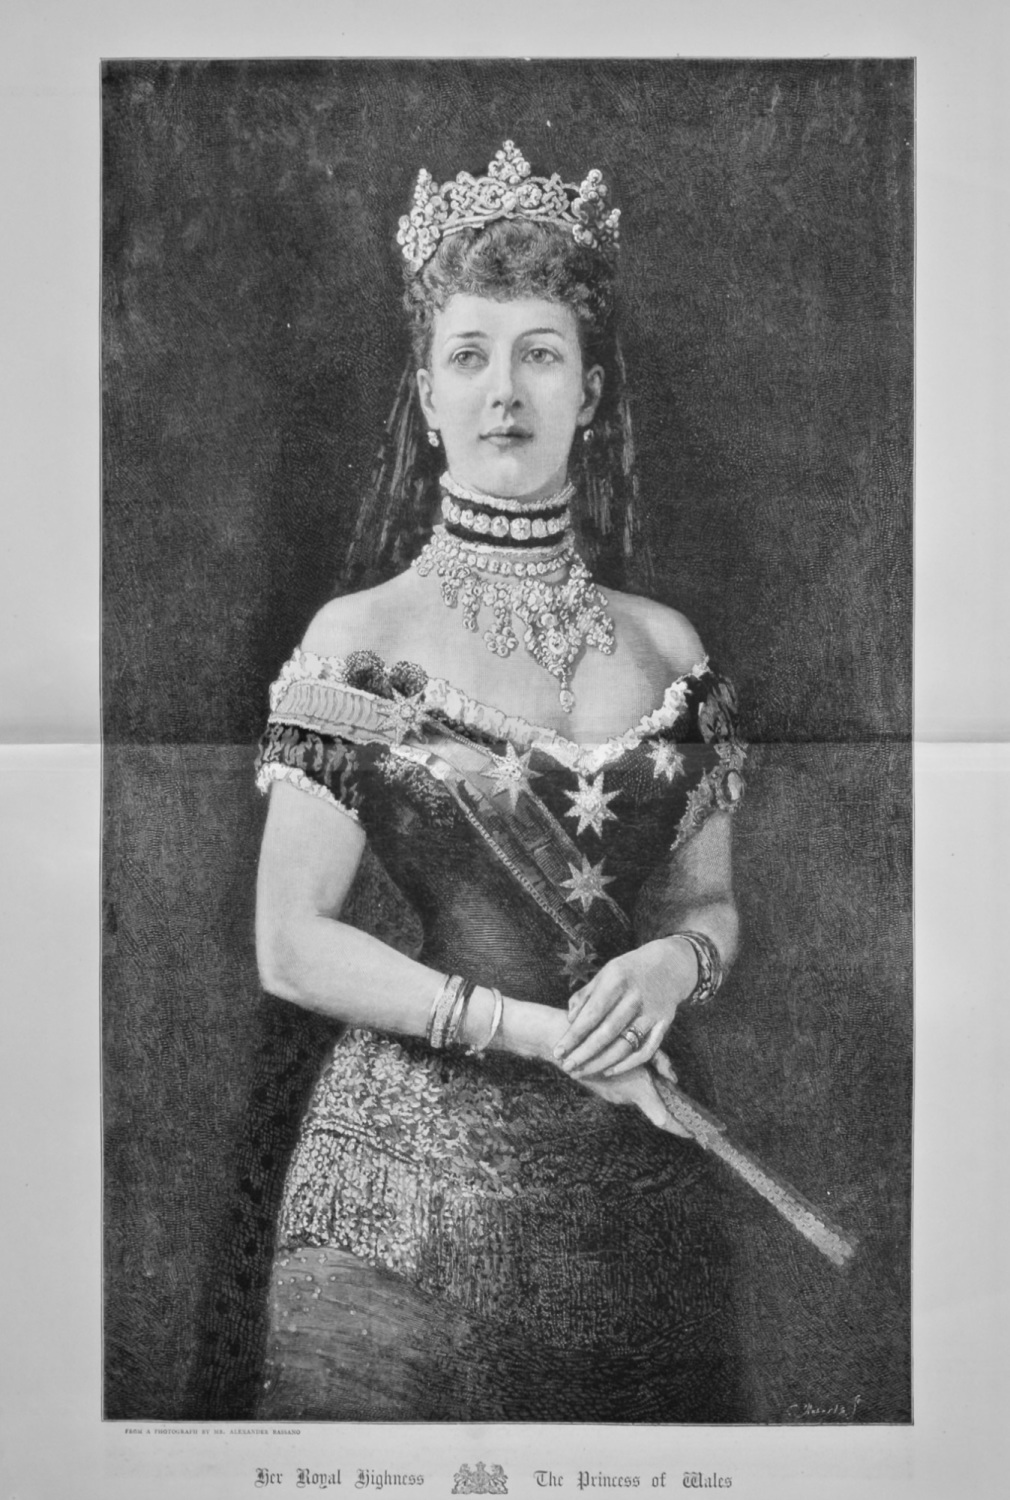 Her Royal Highness the Princess of Wales. 1882